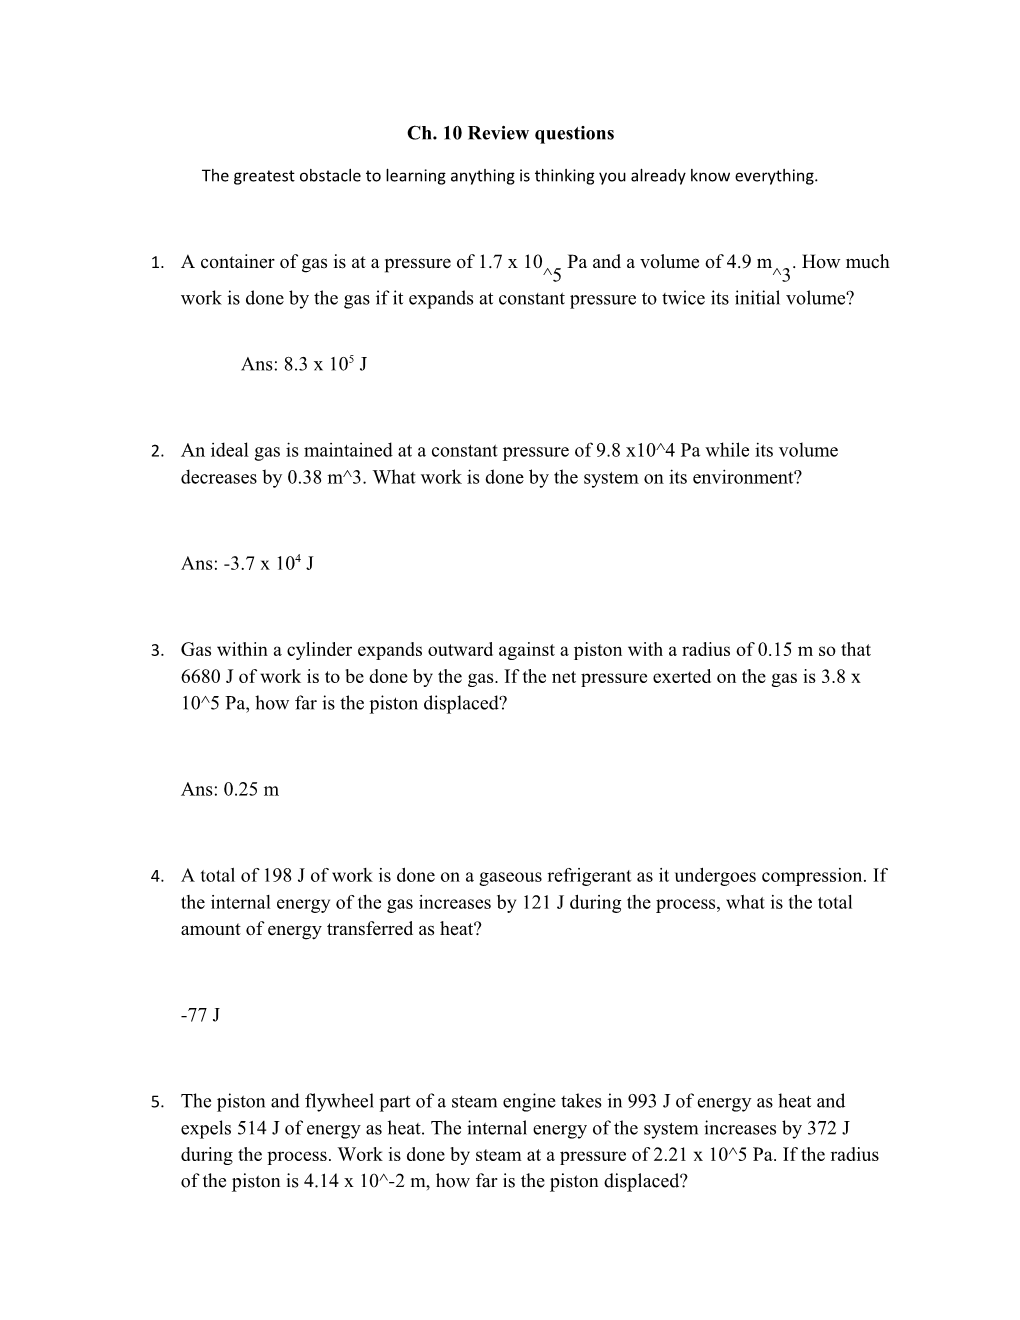 Ch. 10 Review Questions